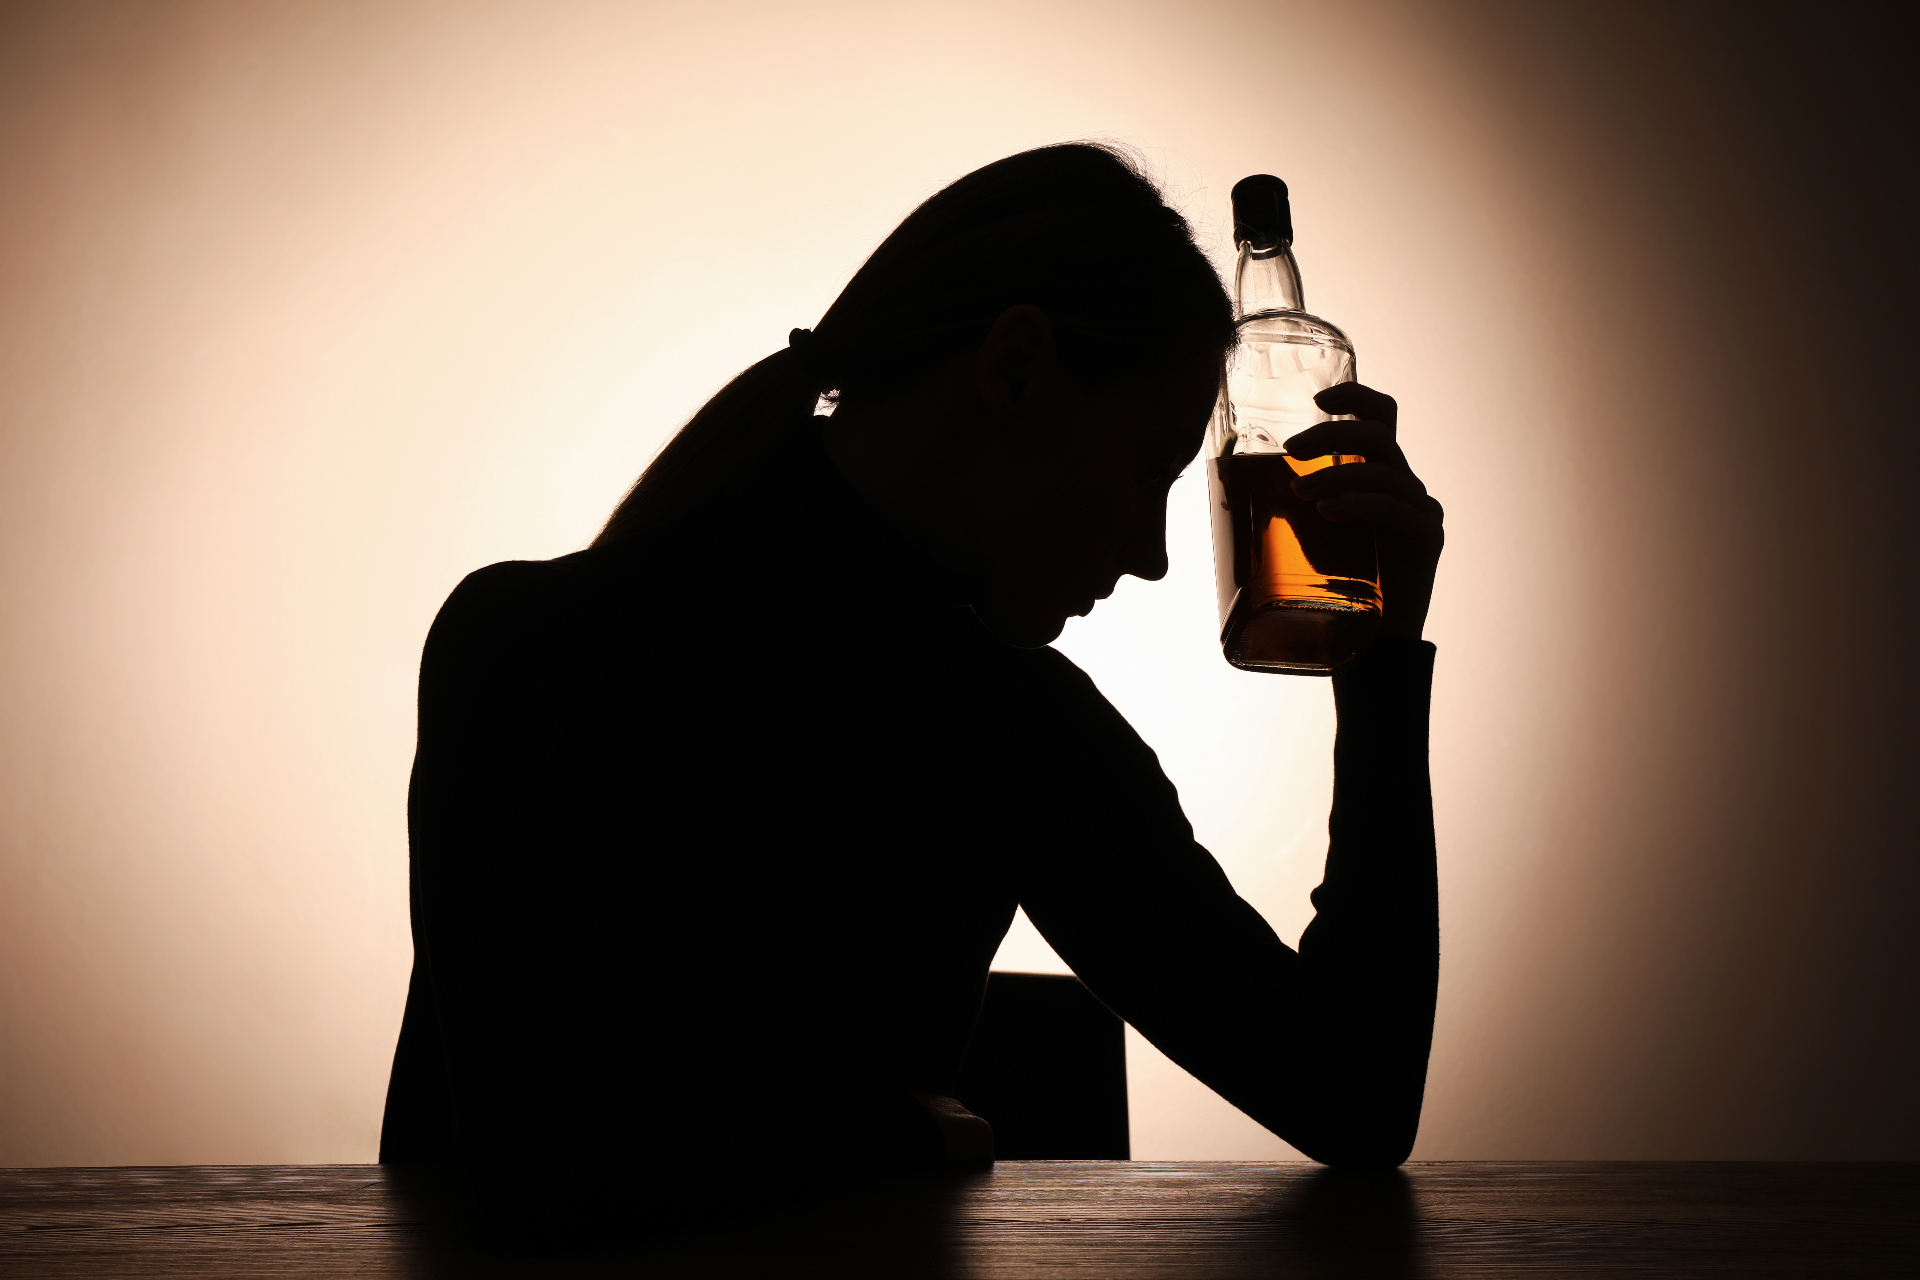 A silhouette of a person holding a liquor bottle against their head. Learn more about EMDR therapy in Delray Beach, FL and how an addiction therapist in Palm Beach, FL can offer support today.